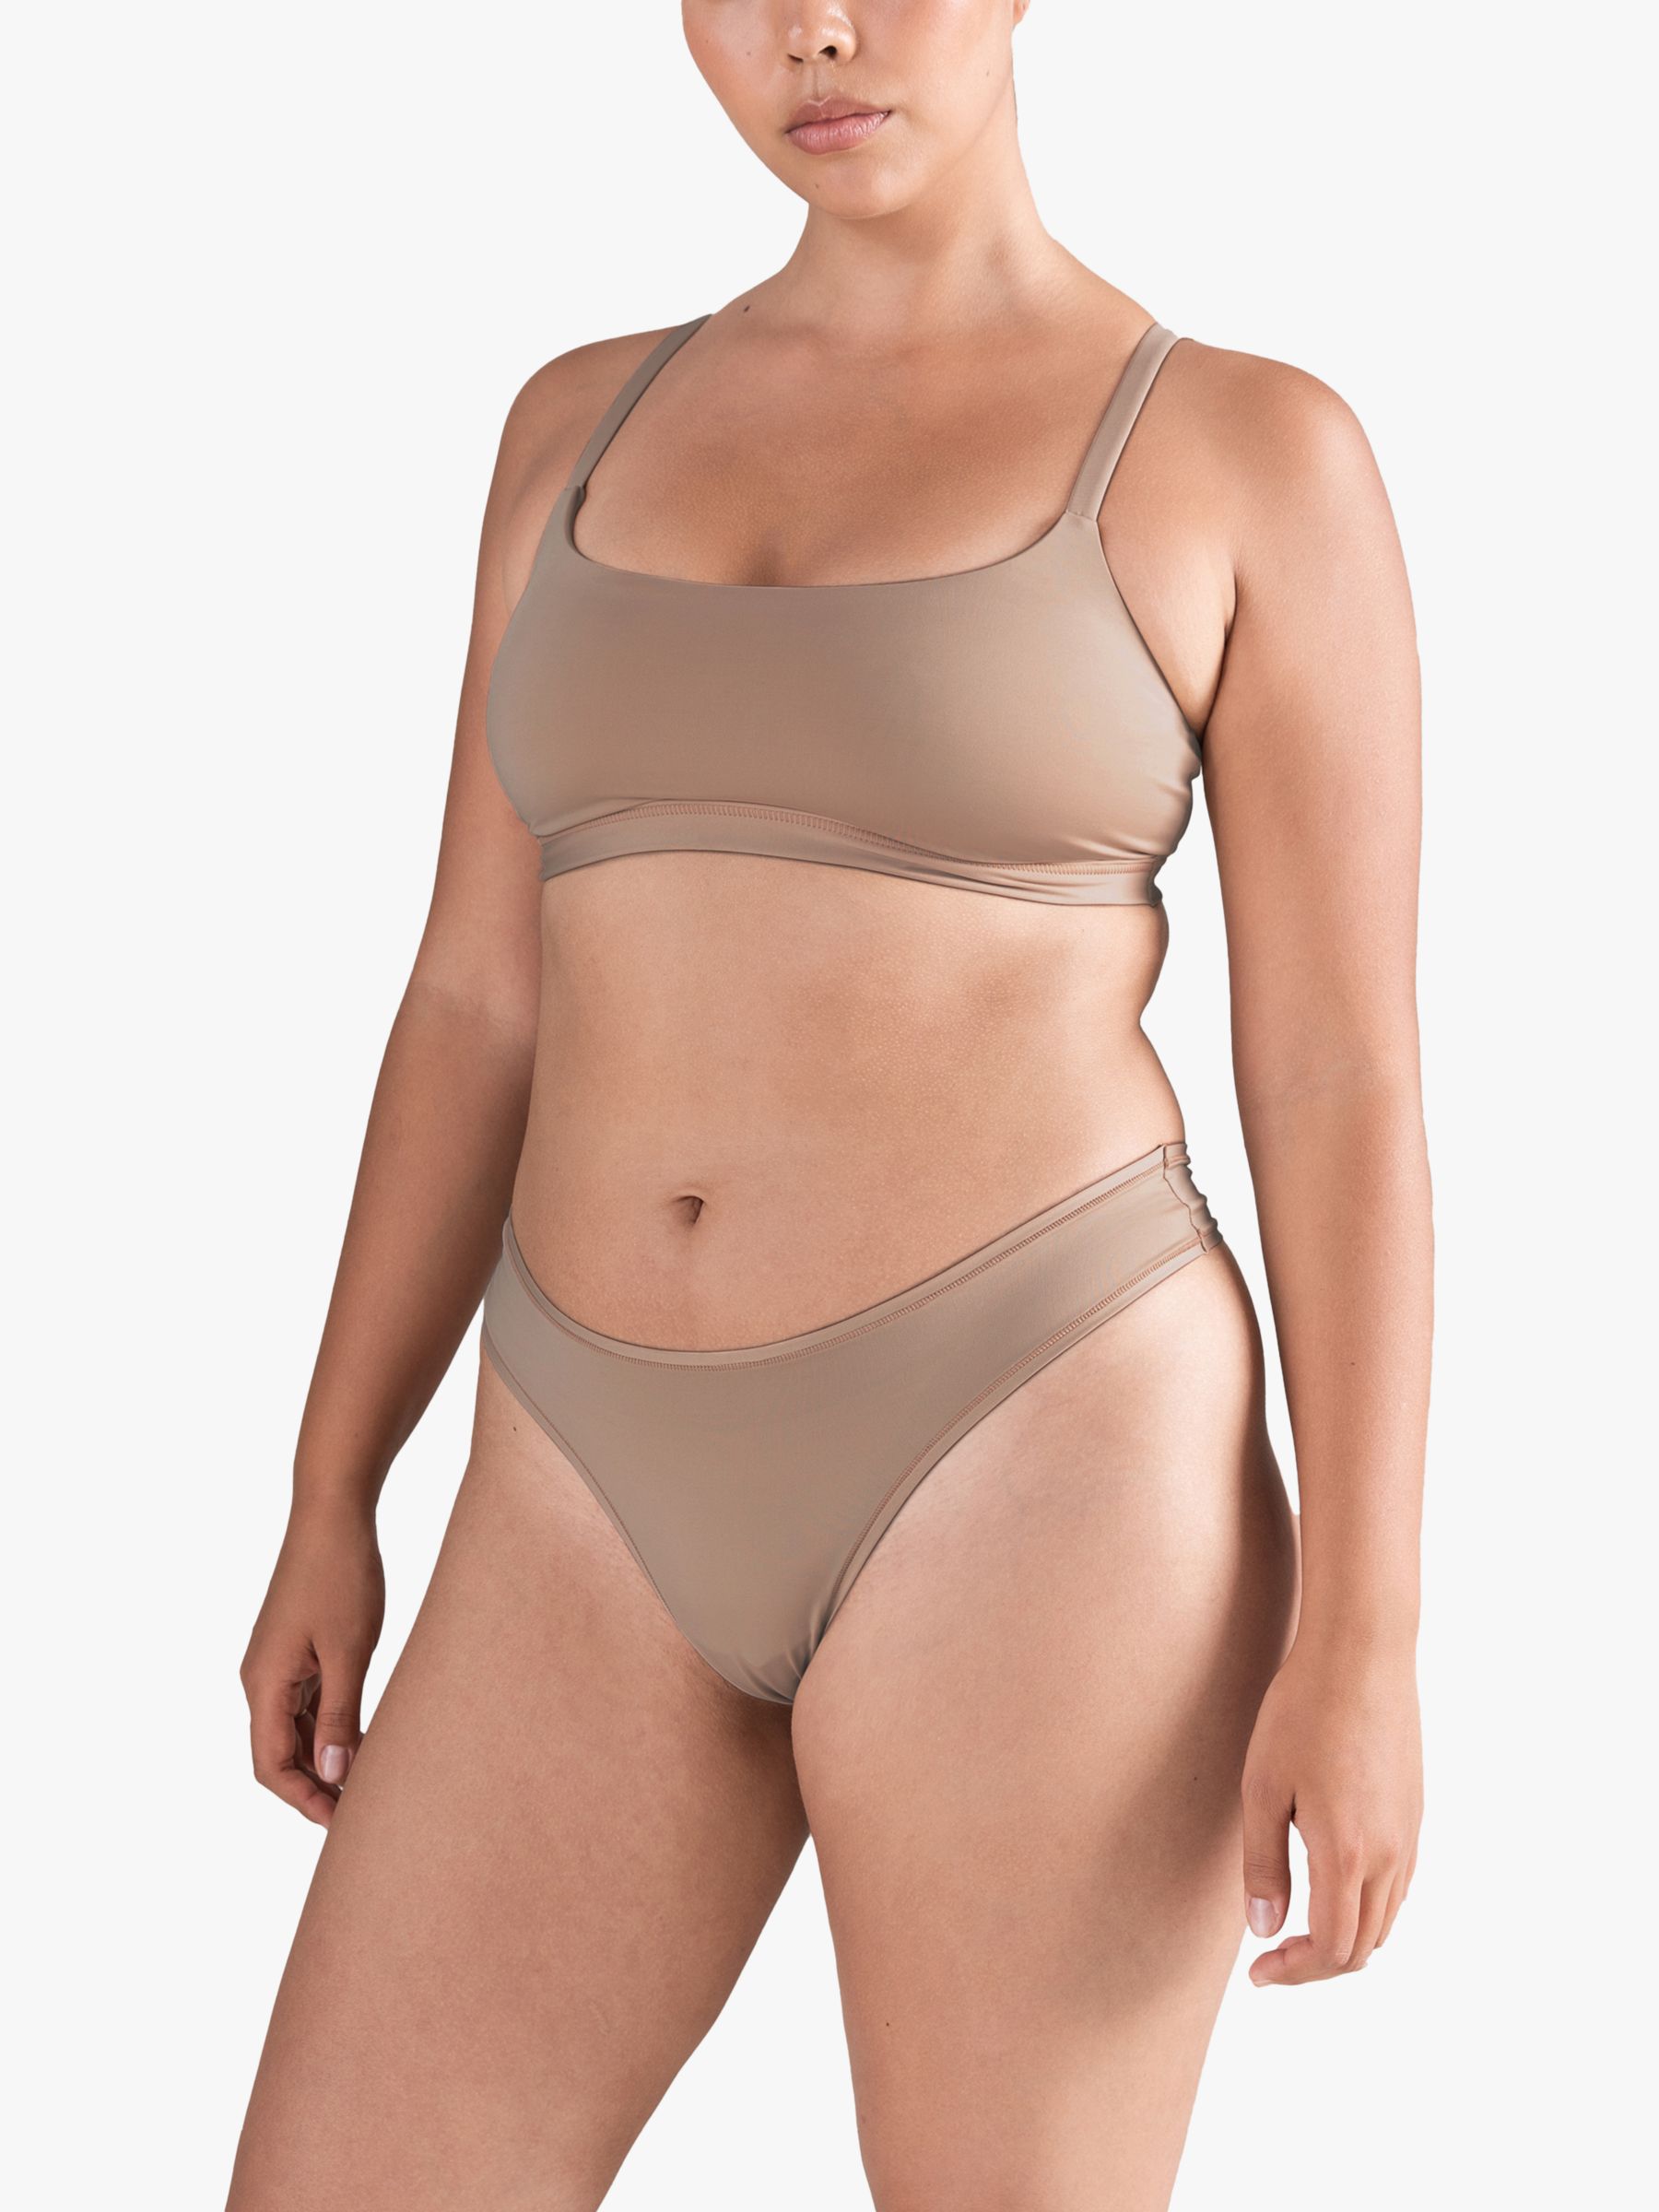 Nudea Second Skin Stretch Dipped Thong, Bare 03 at John Lewis & Partners